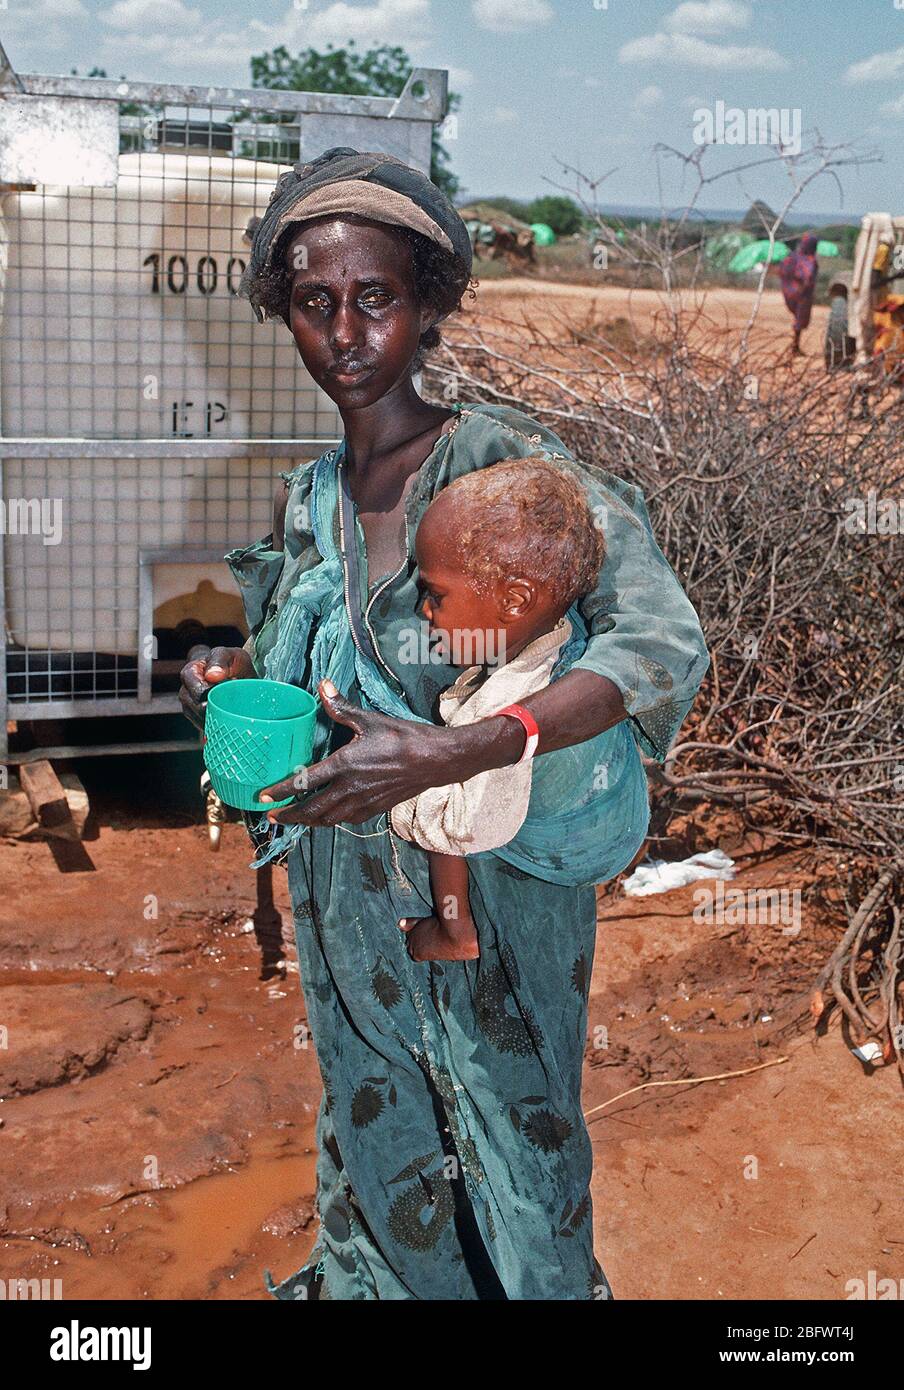 1993 - A Somali refugee woman holds her child as they stand  near a water dispenser at an aid station set up during Operation Restore Hope relief efforts (Badera Somalia) Stock Photo